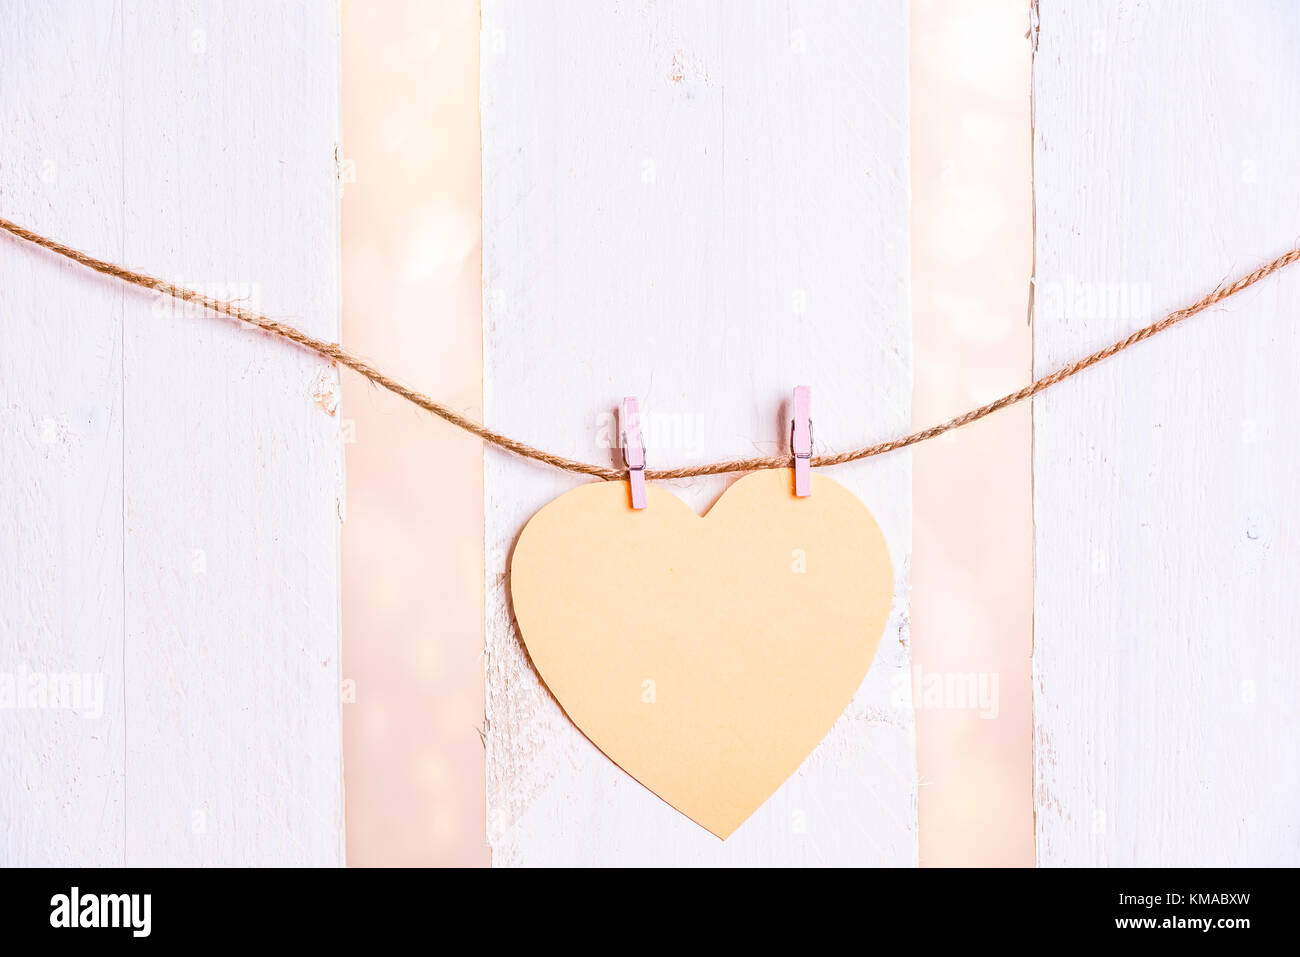 Romantic image with a yellow heart-shaped paper note tied to a string with two wooden clips, on a white wooden fence background. Stock Photo